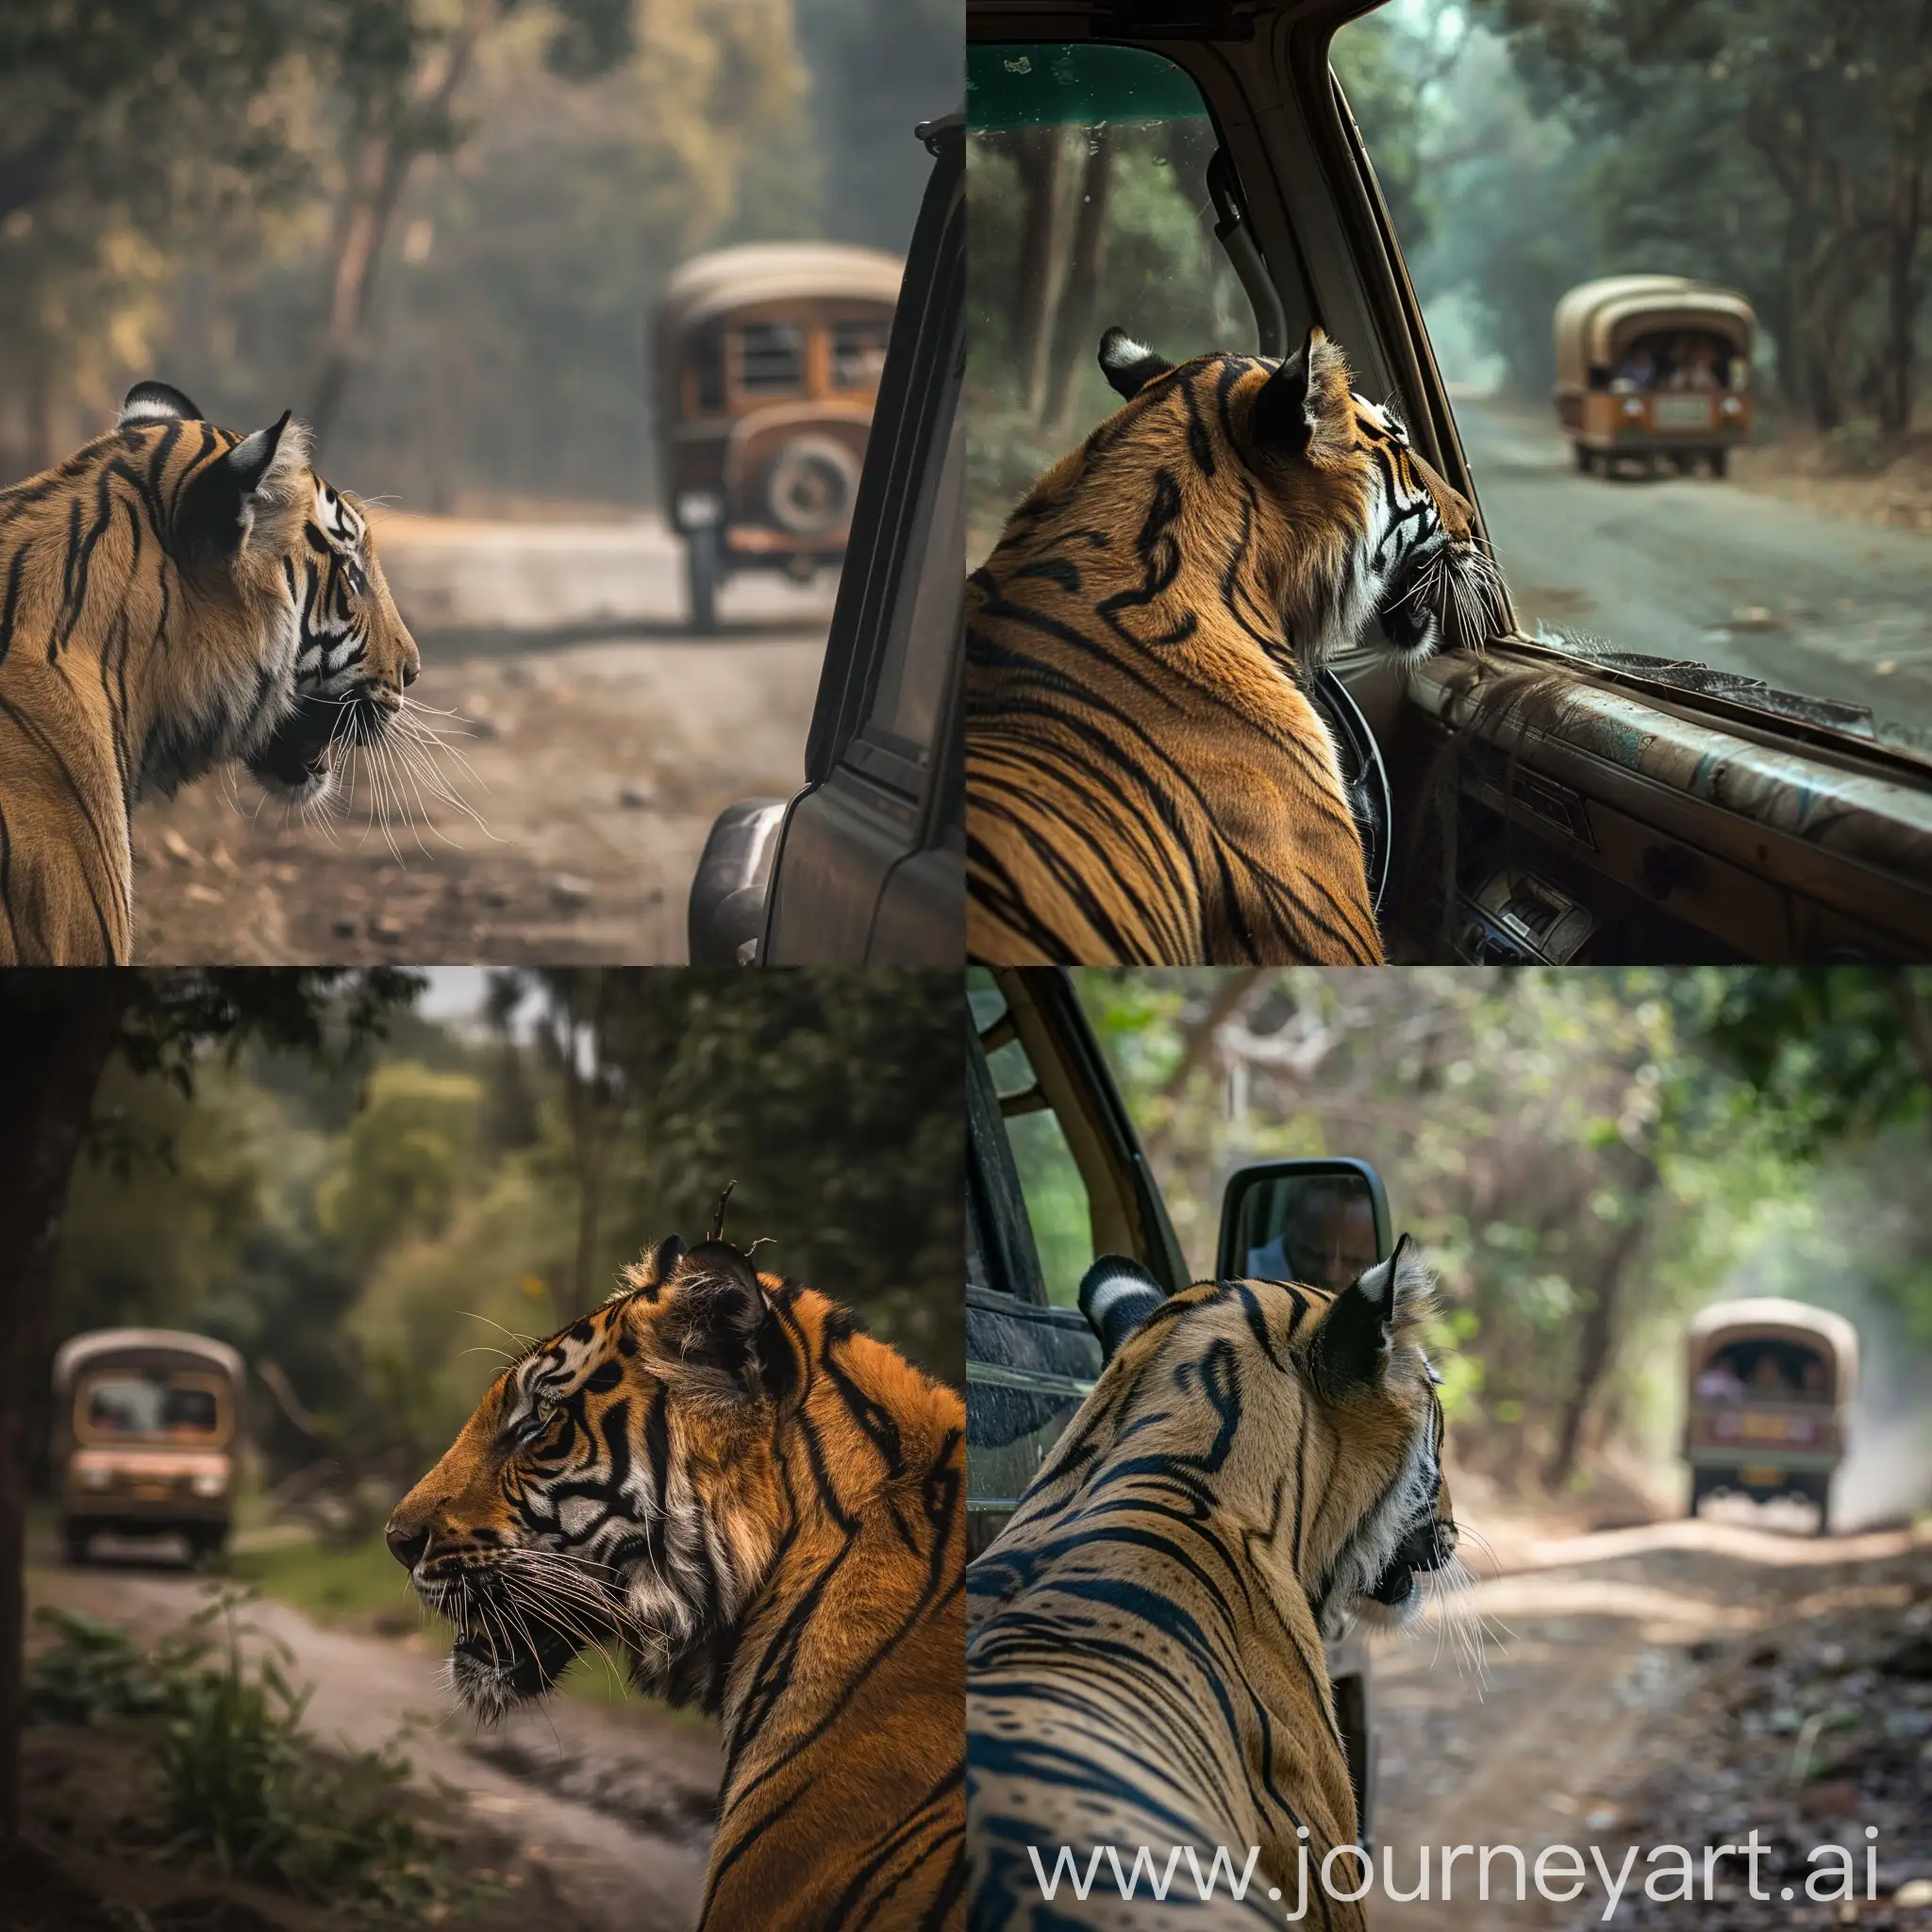 Curious-Tiger-Observing-Gypsy-Caravan-Approaching-the-Jungle